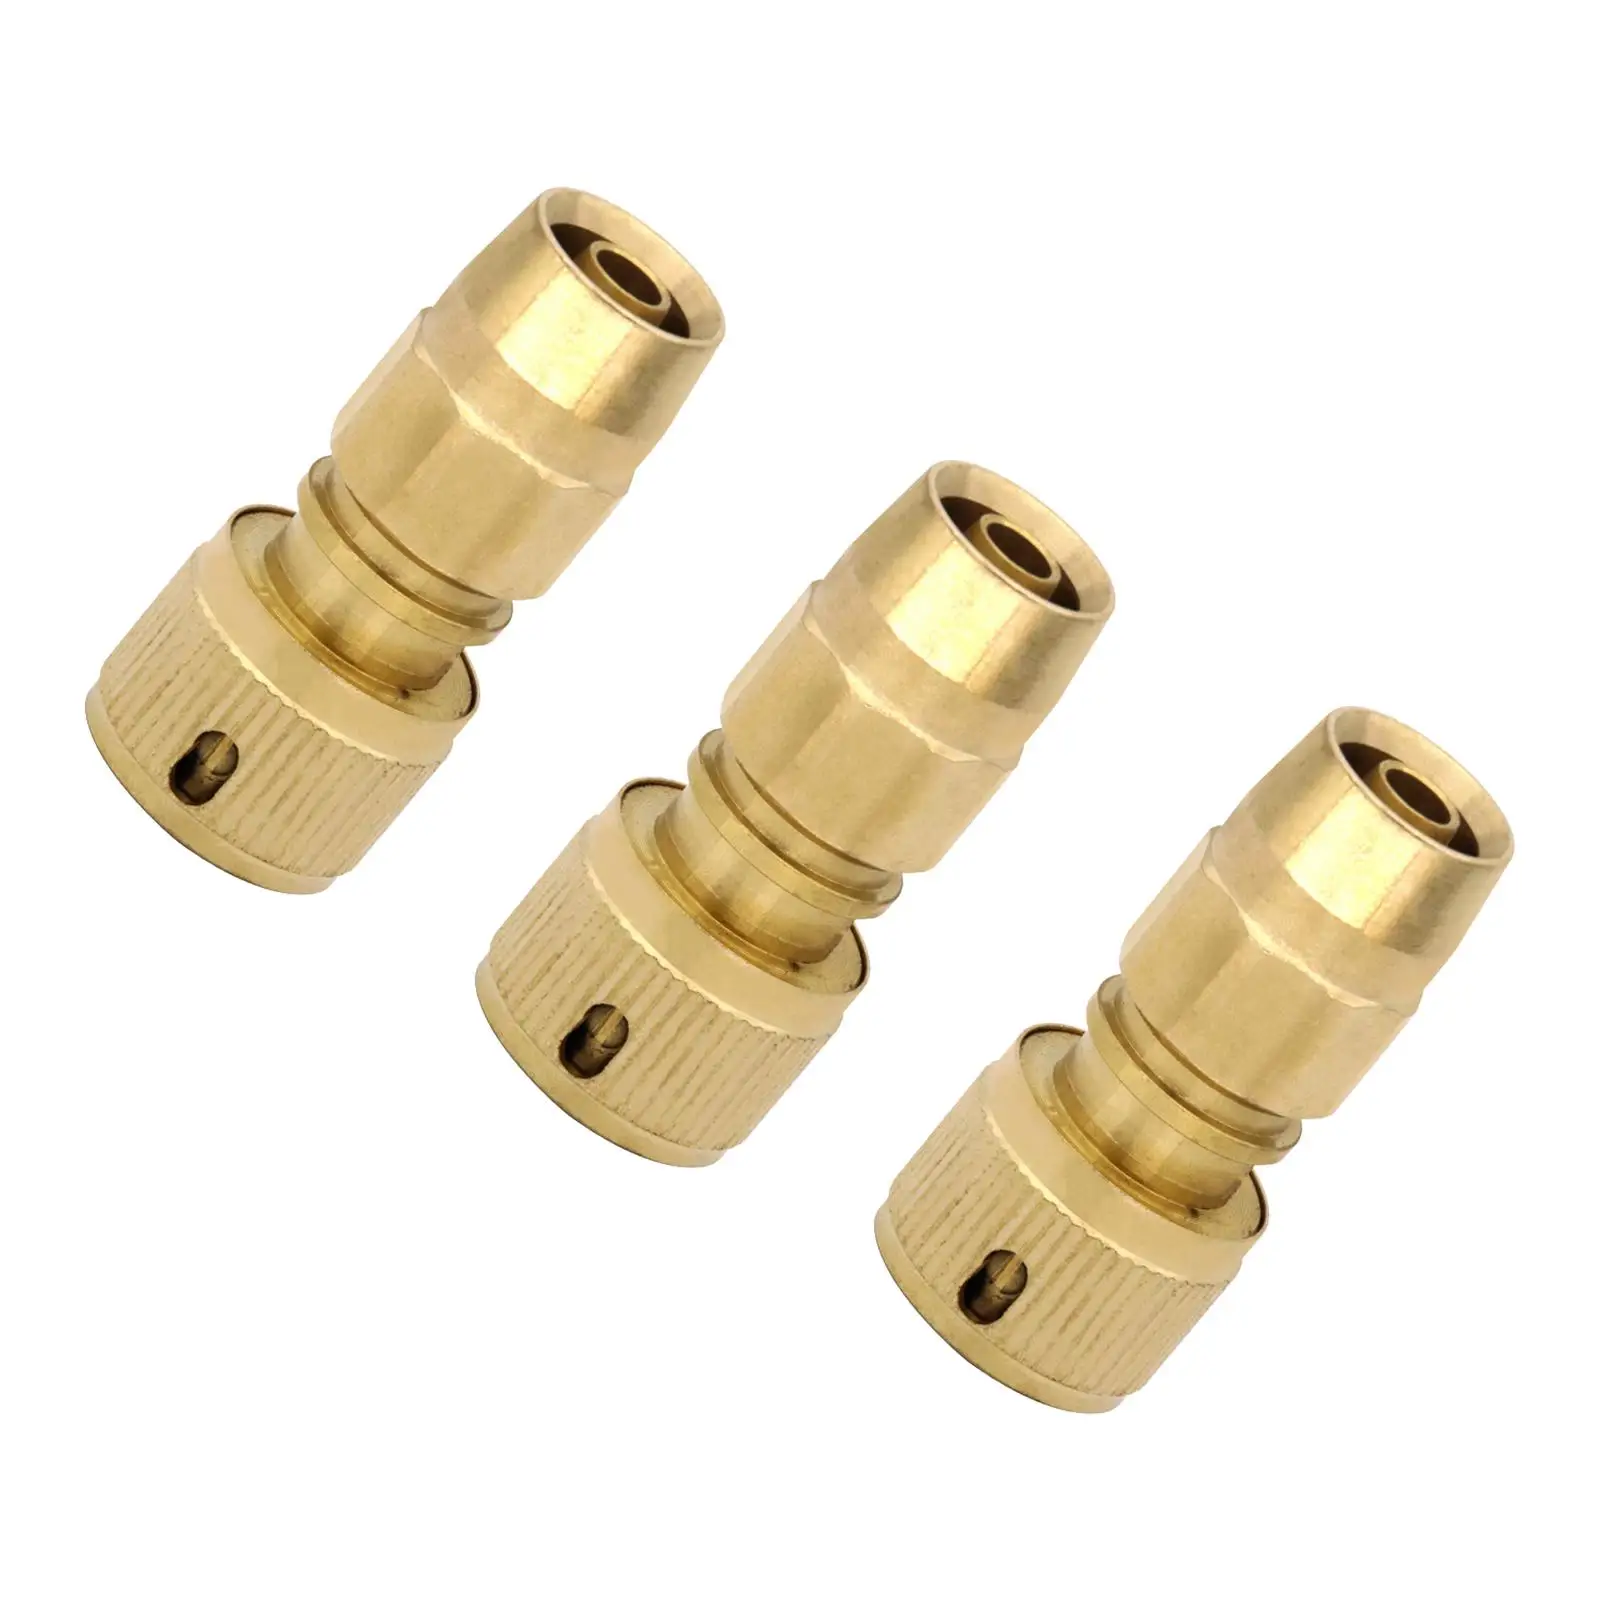 3x Brass Expandable Hose Repair Adapter Accessories Quick Connect Hose Joint Male Pipe Adapter Hose Connectors